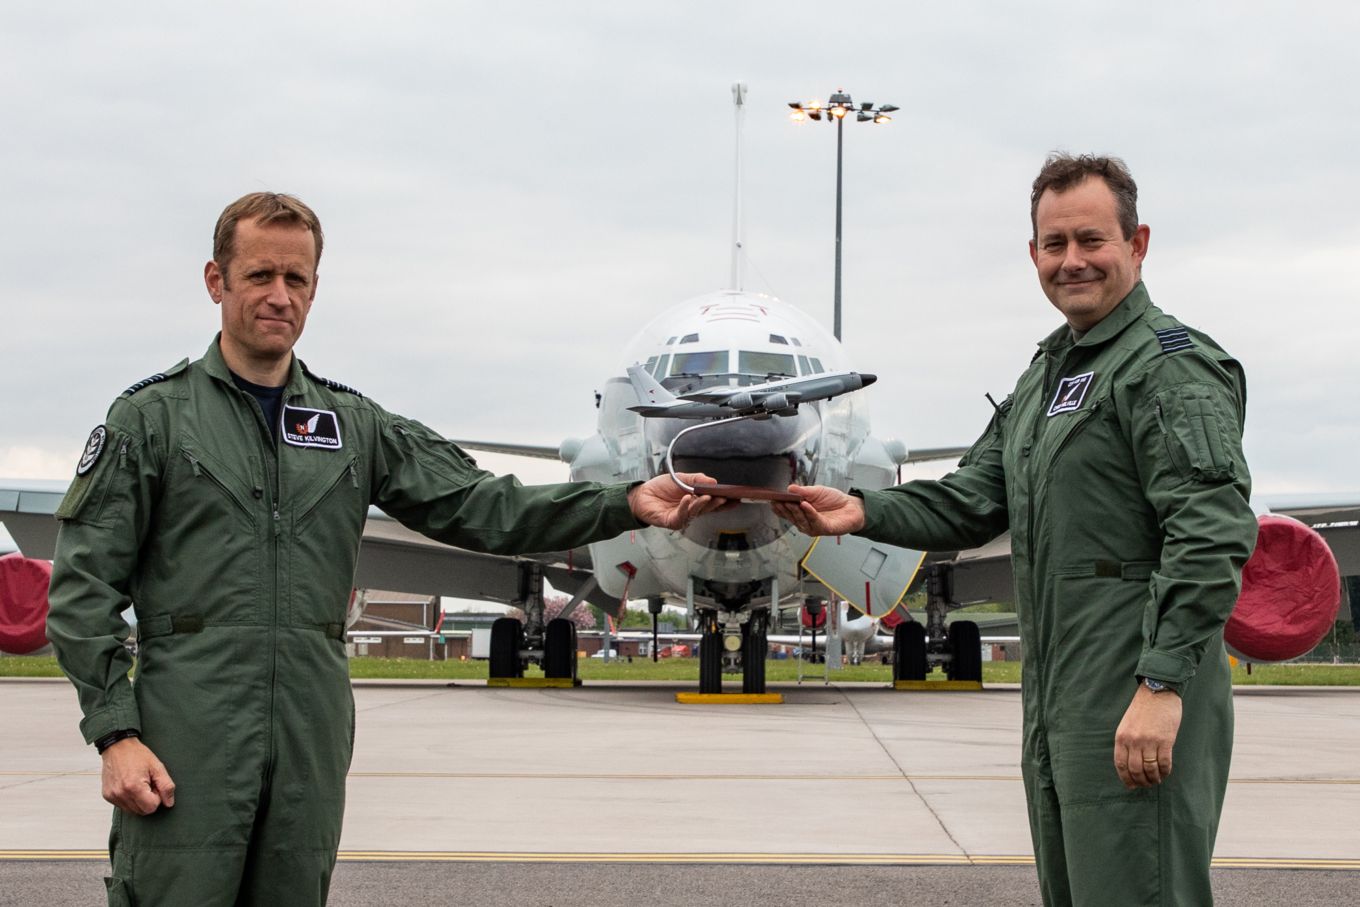 Group Captain Chris Melville and Group Captain Stephen Kilvington hold a trophy together, in-front of a plane. 